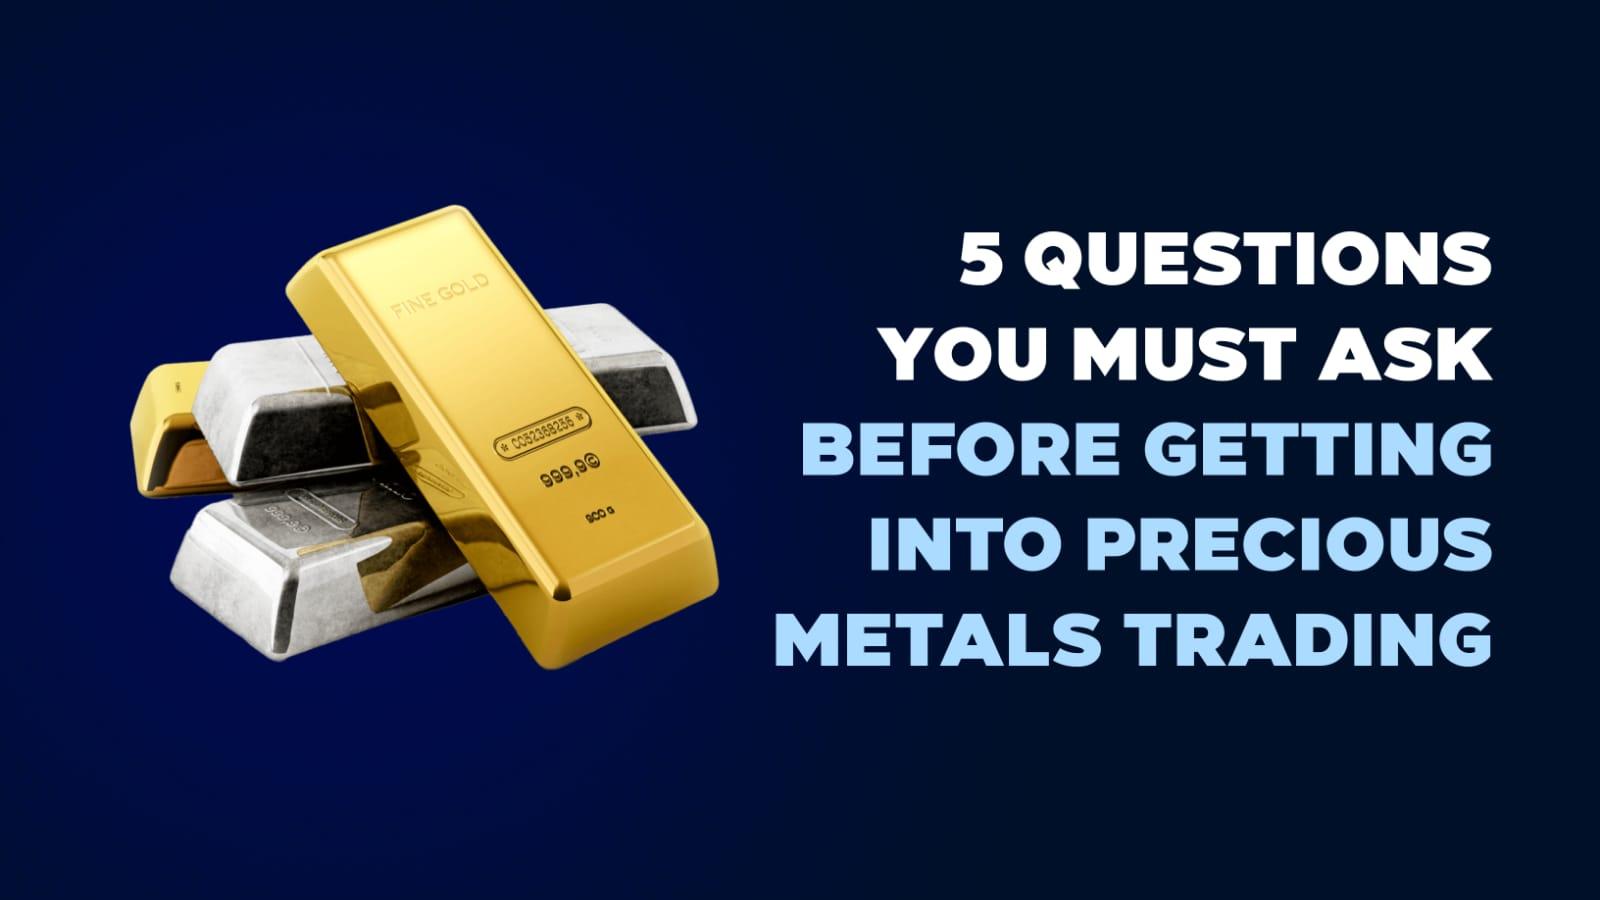 5 Questions You Must Ask Before Getting Into Precious Metals Trading